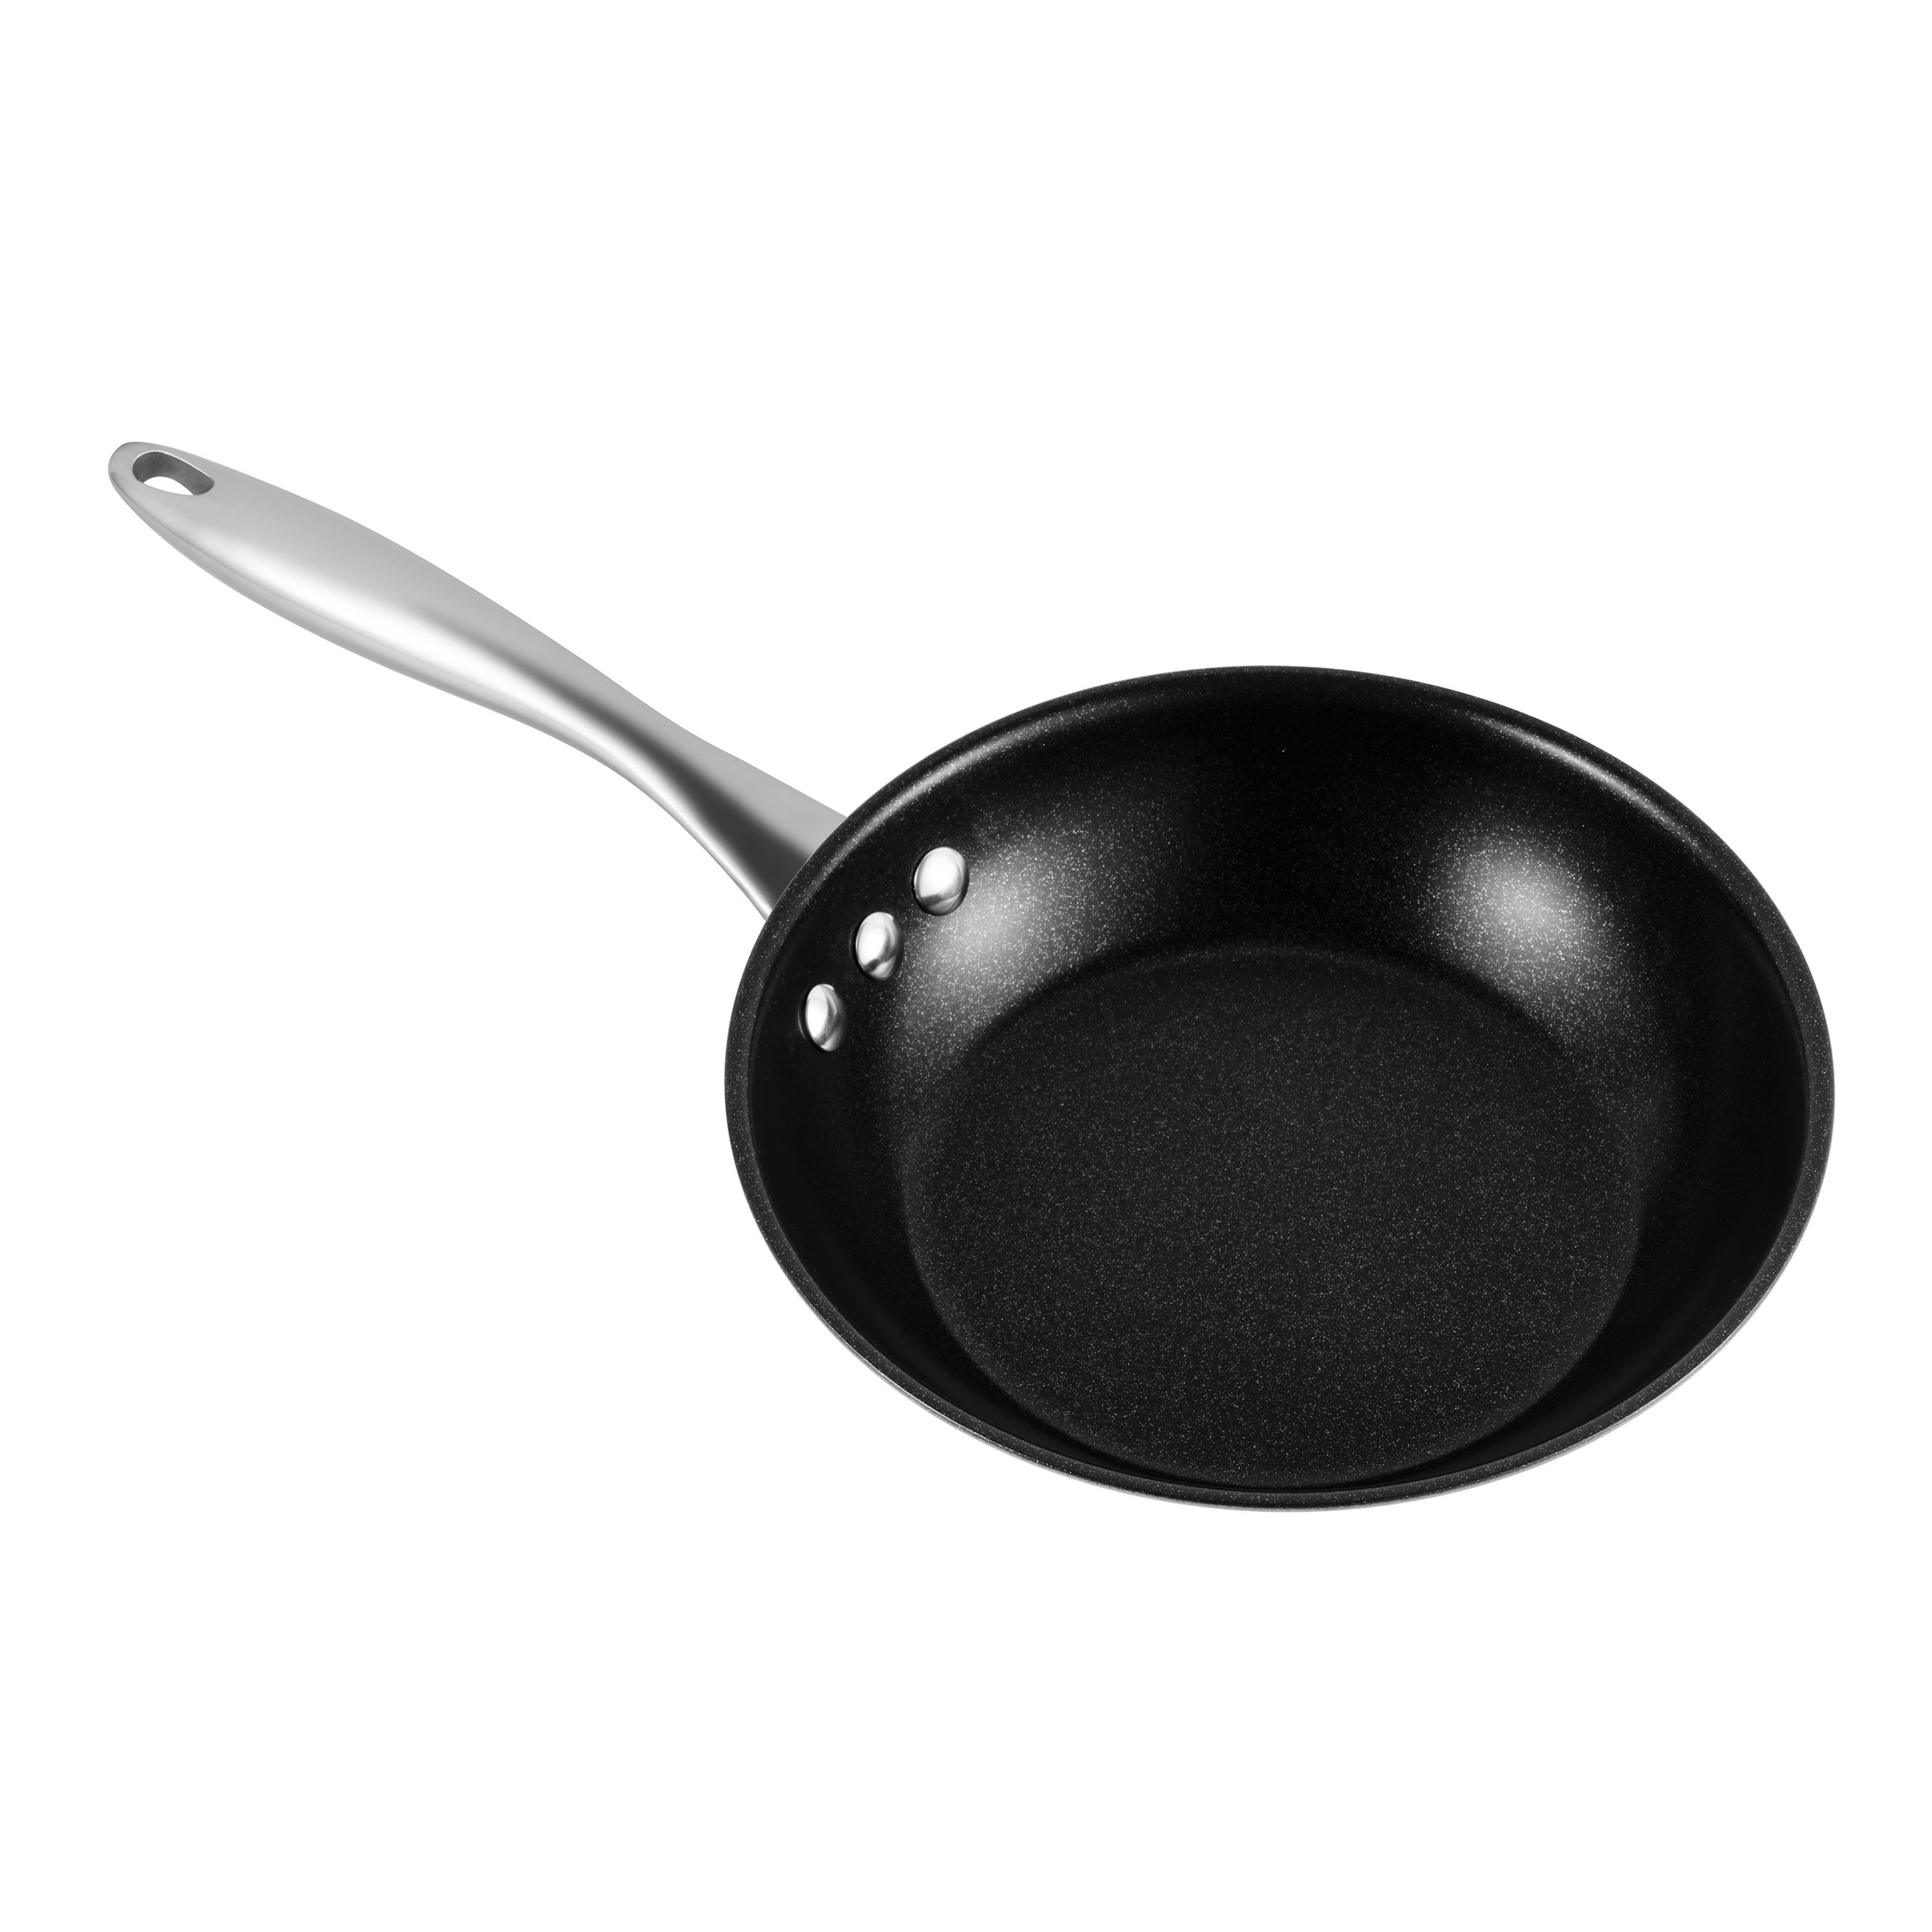  10 (26 cm) Stainless Steel Pan by Ozeri with ETERNA, a 100%  PFOA and APEO-Free Non-Stick Coating: Home & Kitchen